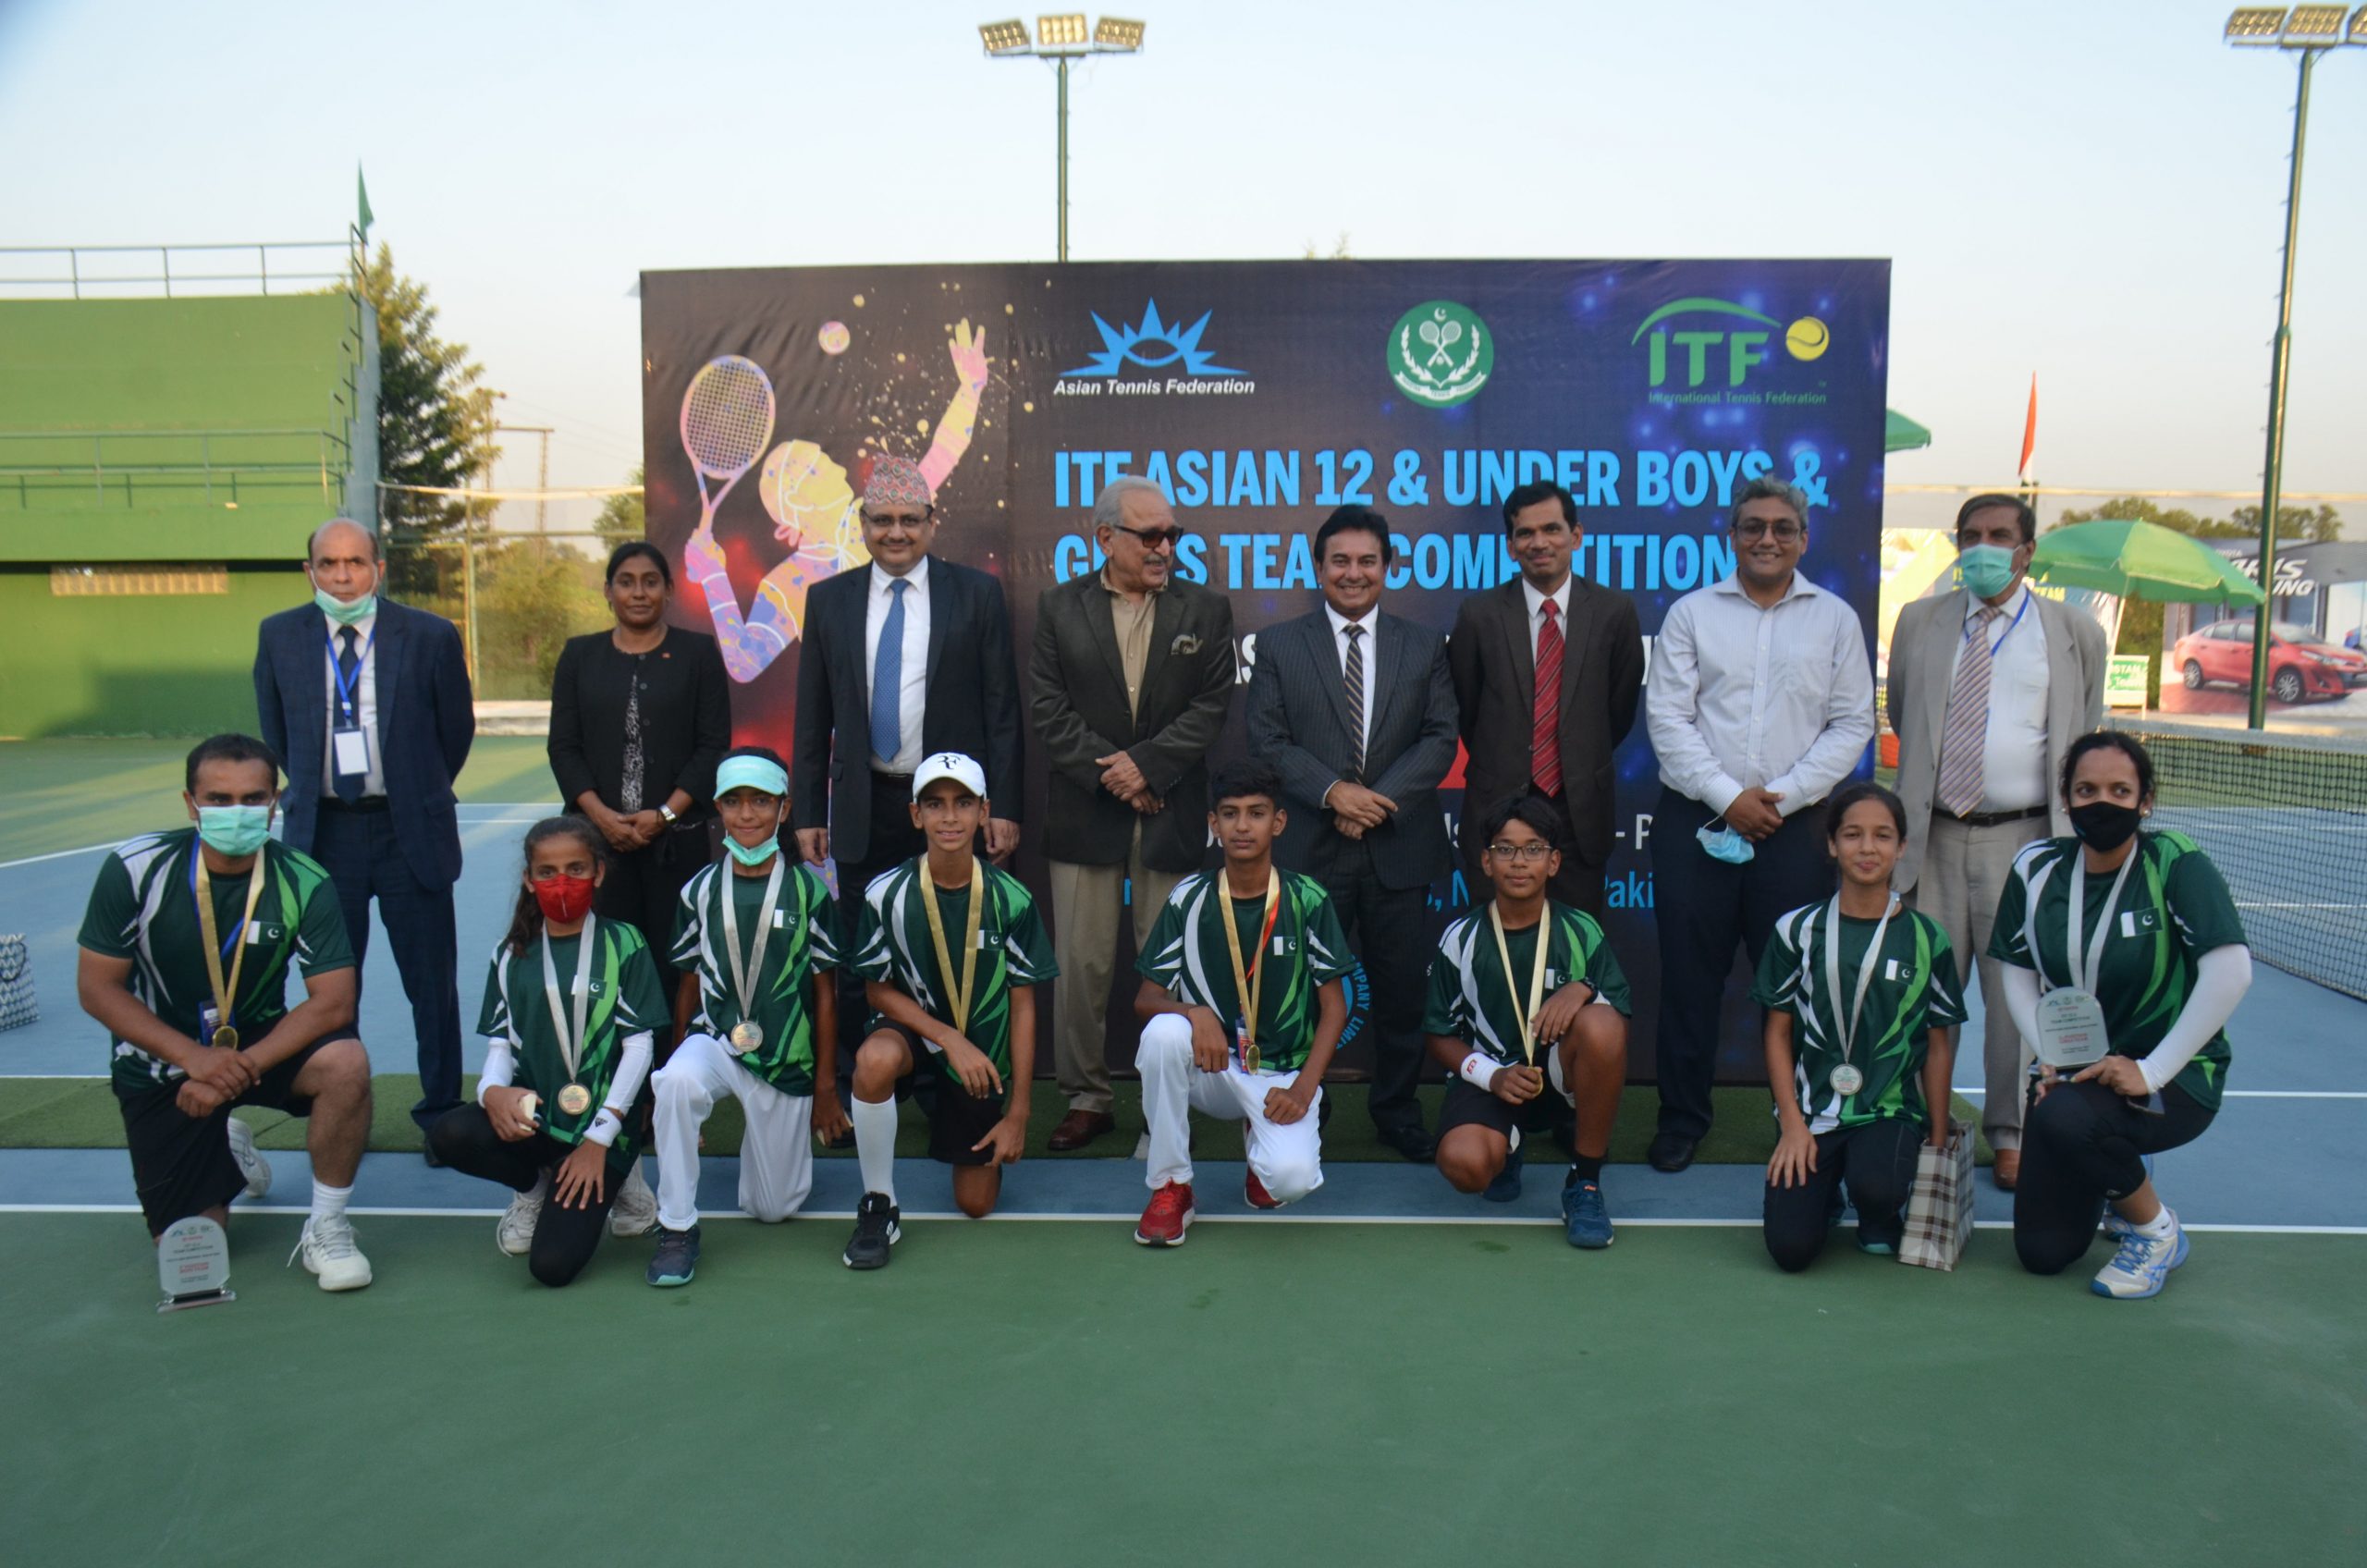 India and Pakistan qualify for final of ITF Asia 12andU team competition